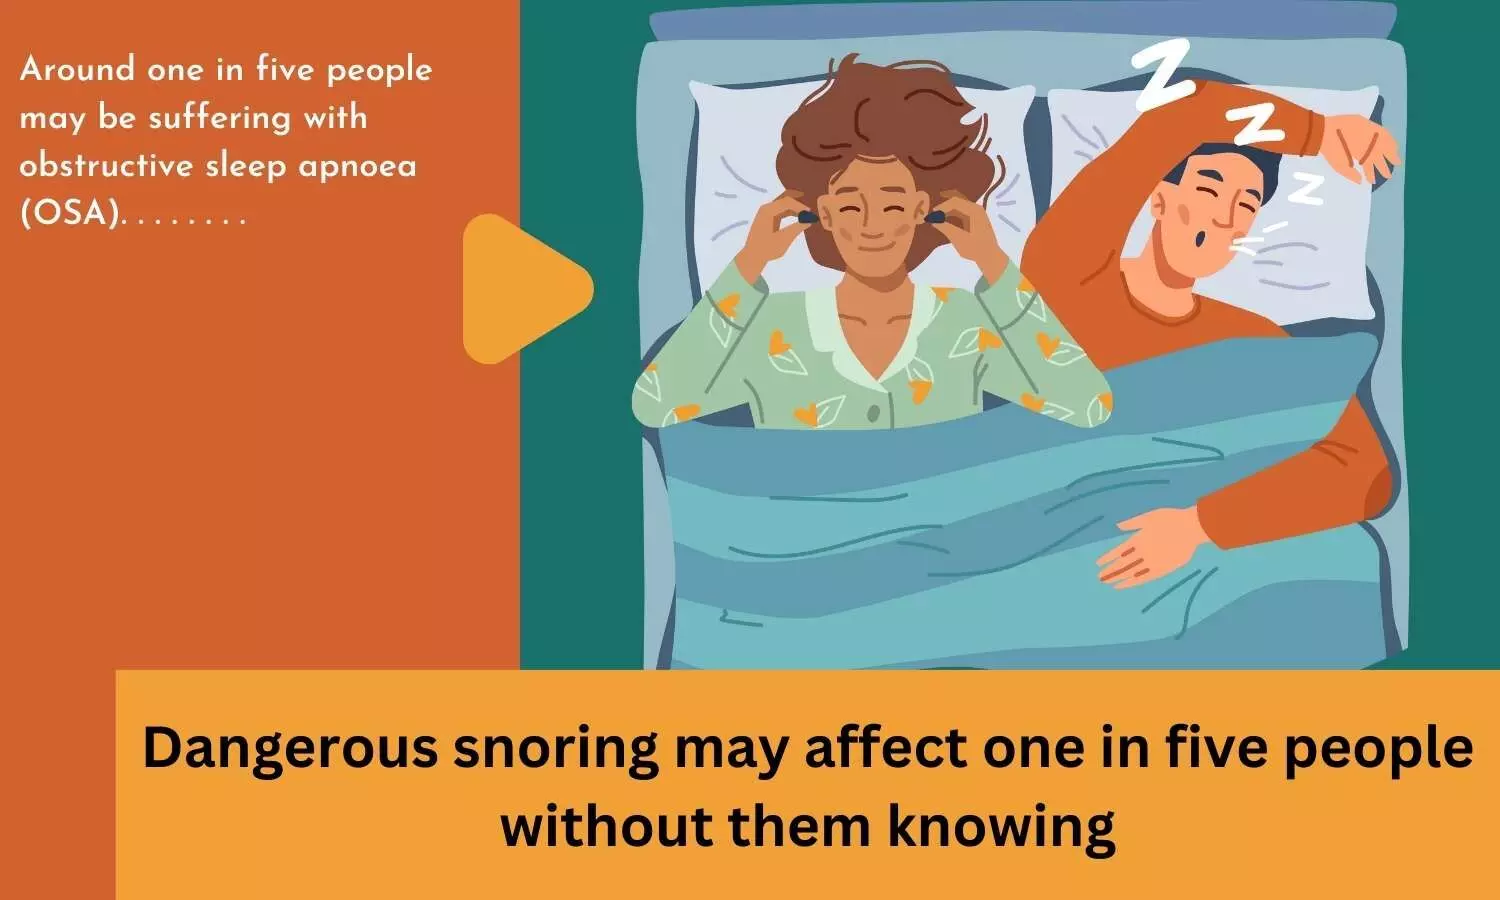 Dangerous snoring may affect one in five people without them knowing